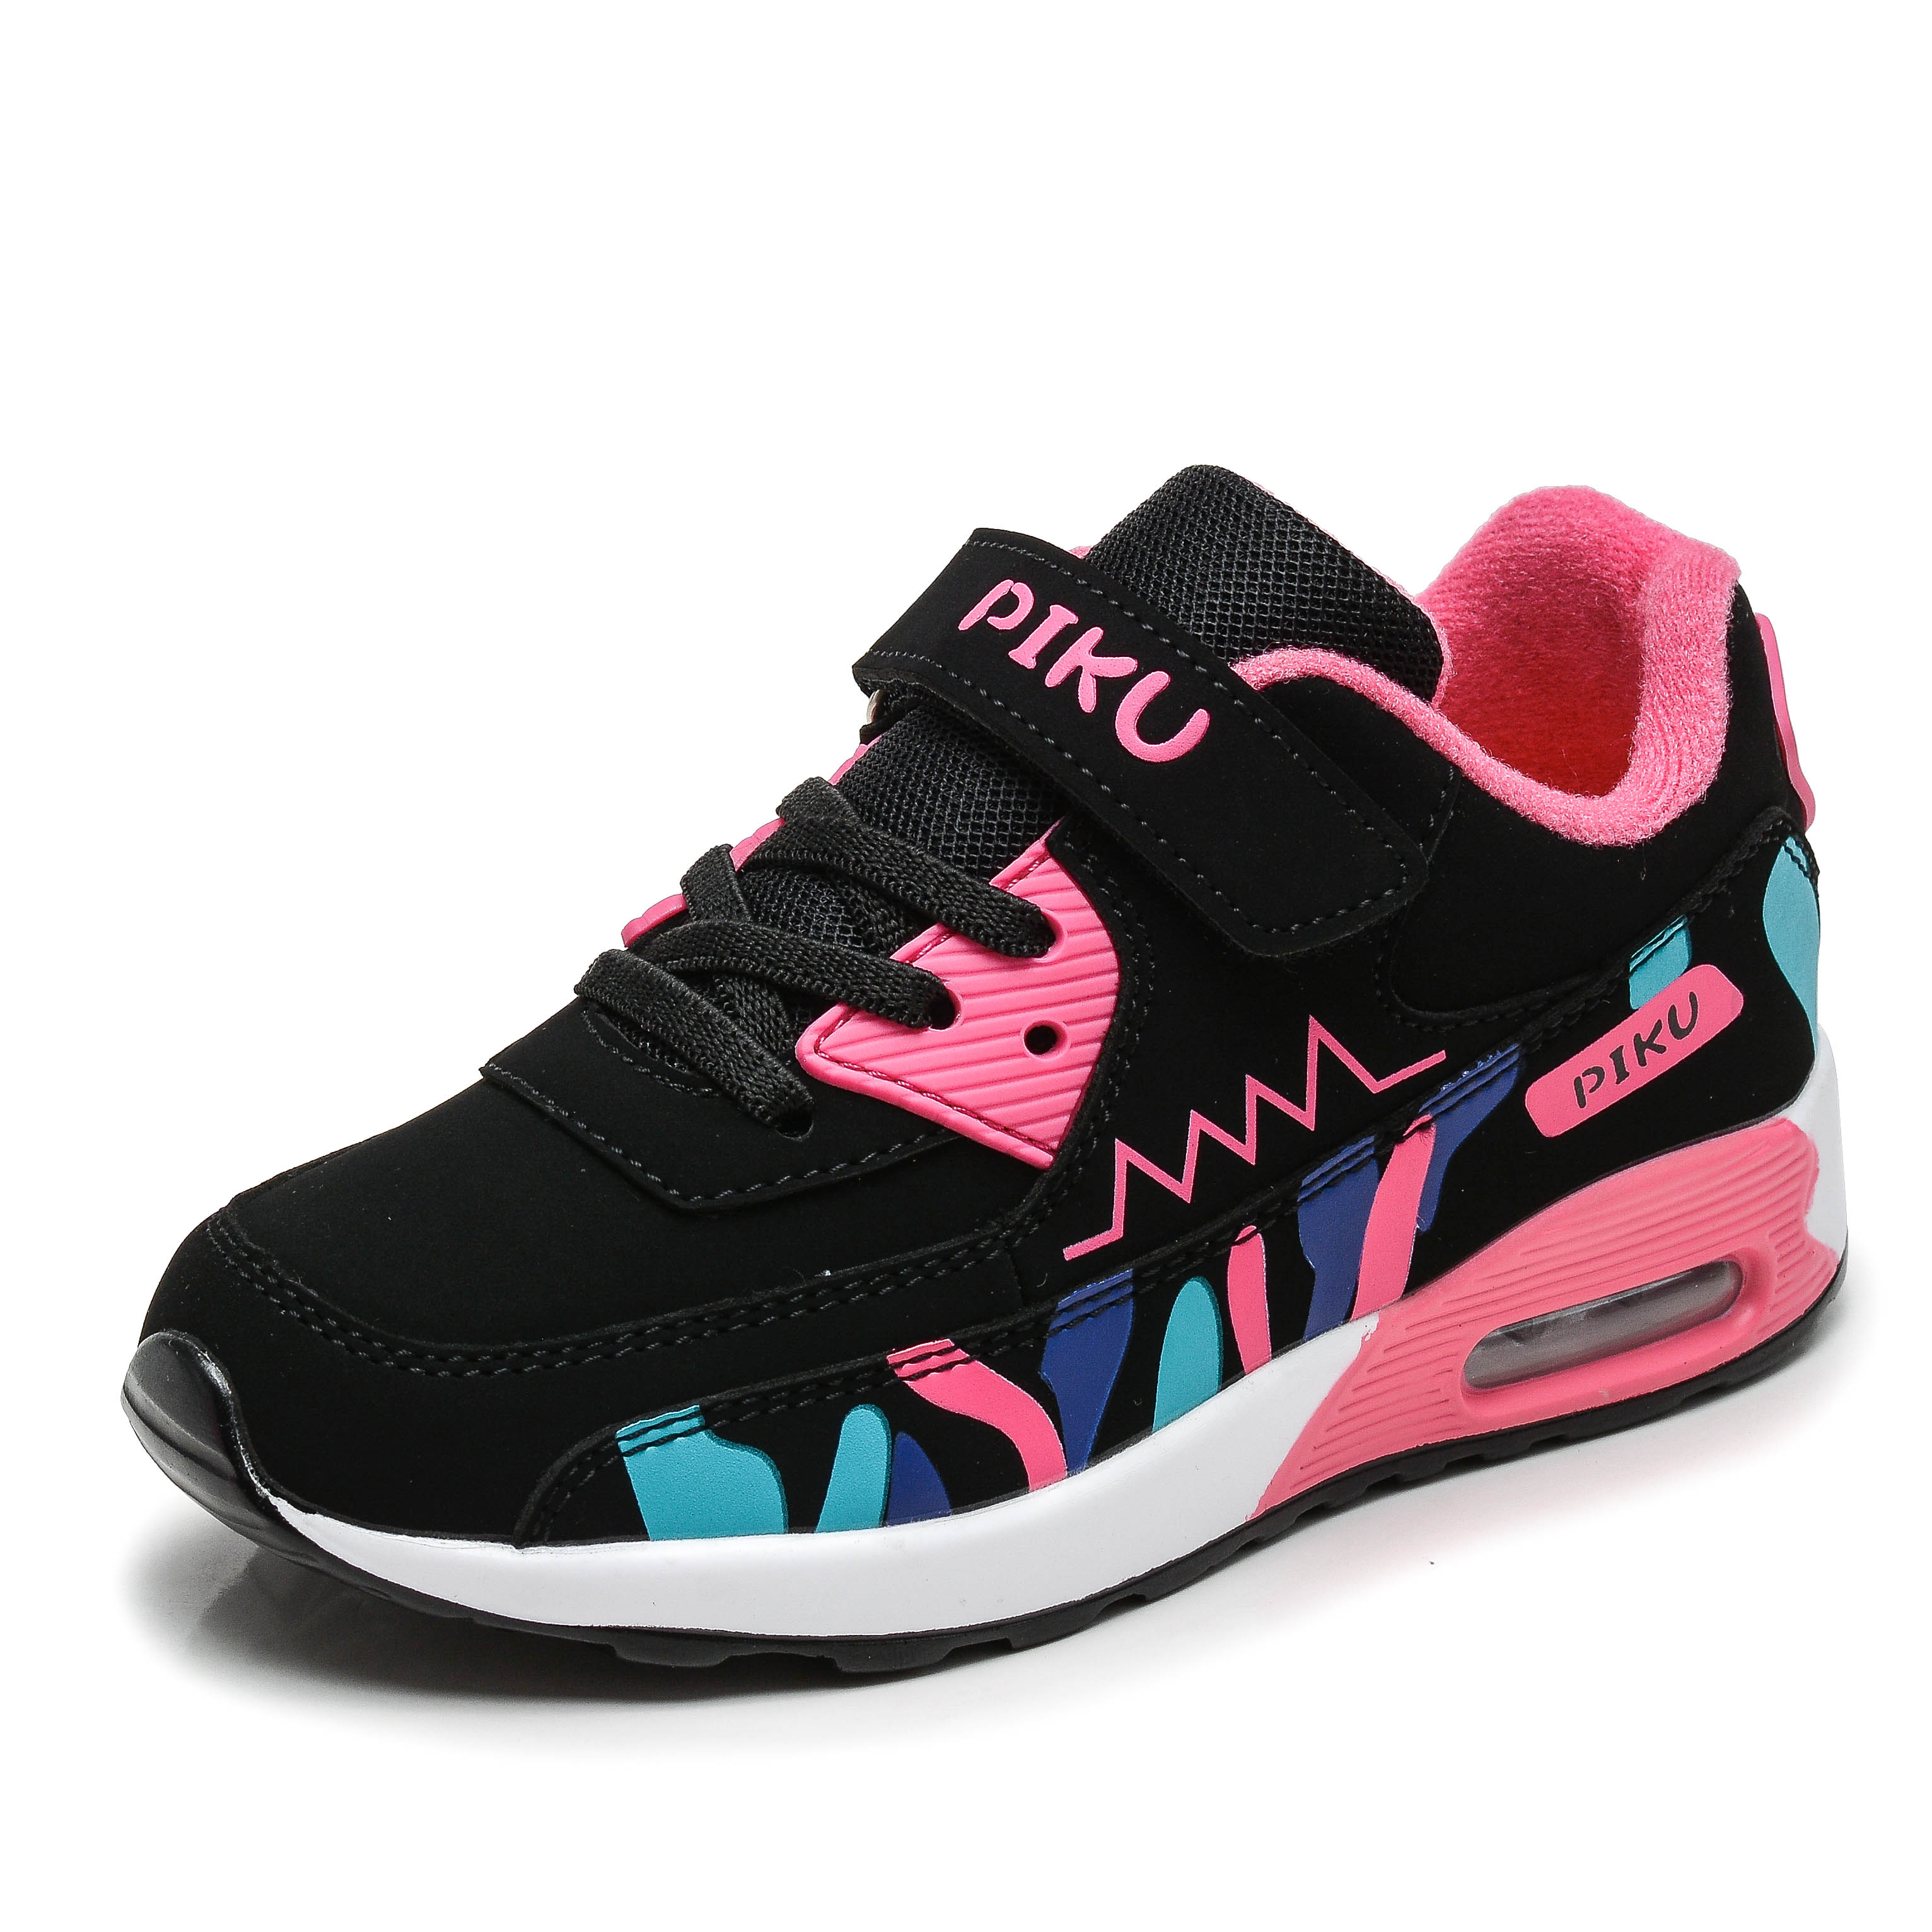 2018New children's casual sports running shoes brand Fashion classic children's air cushion shoes Girls comfortable breathable sneakers